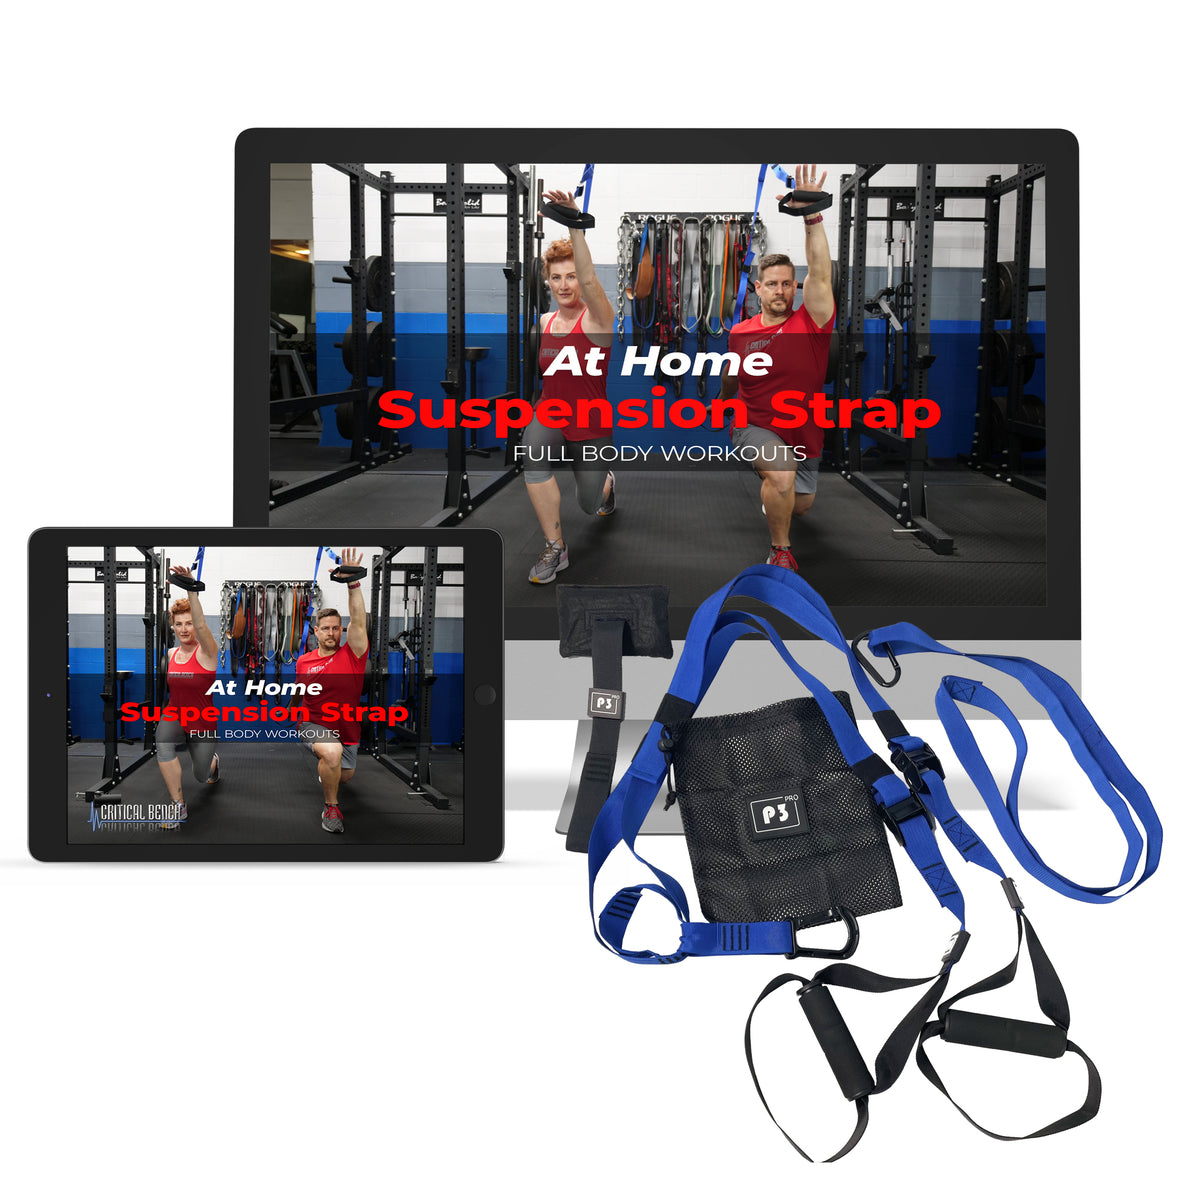 At Home Suspension Strap Full Body Workouts - Digital/DVD